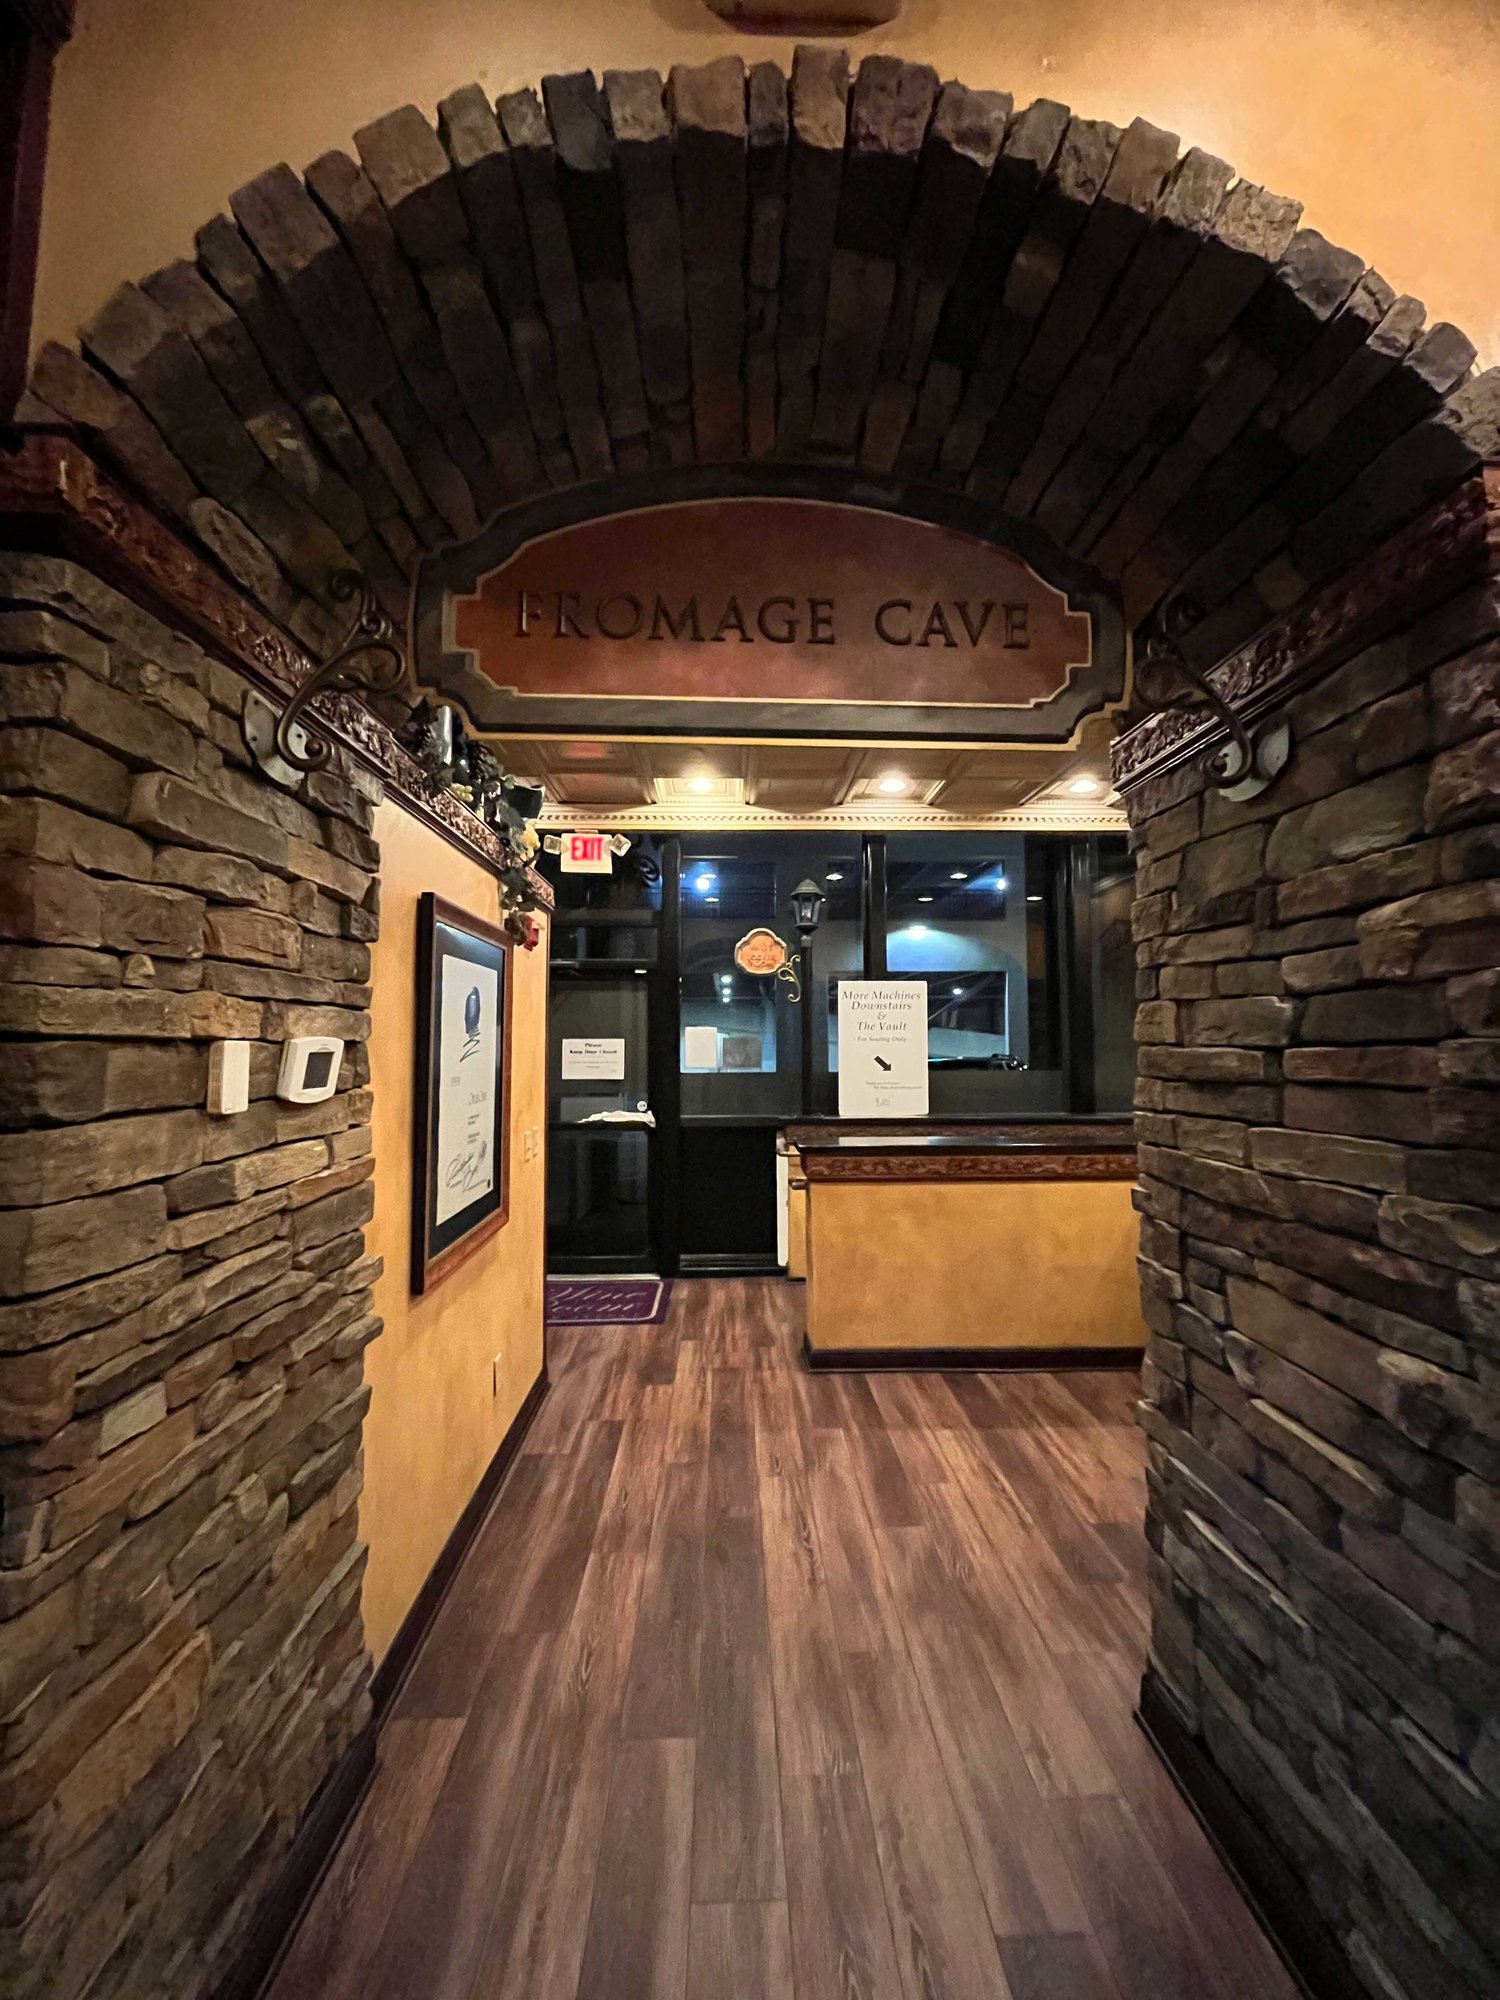 doorway with stones and sign with fromage cave